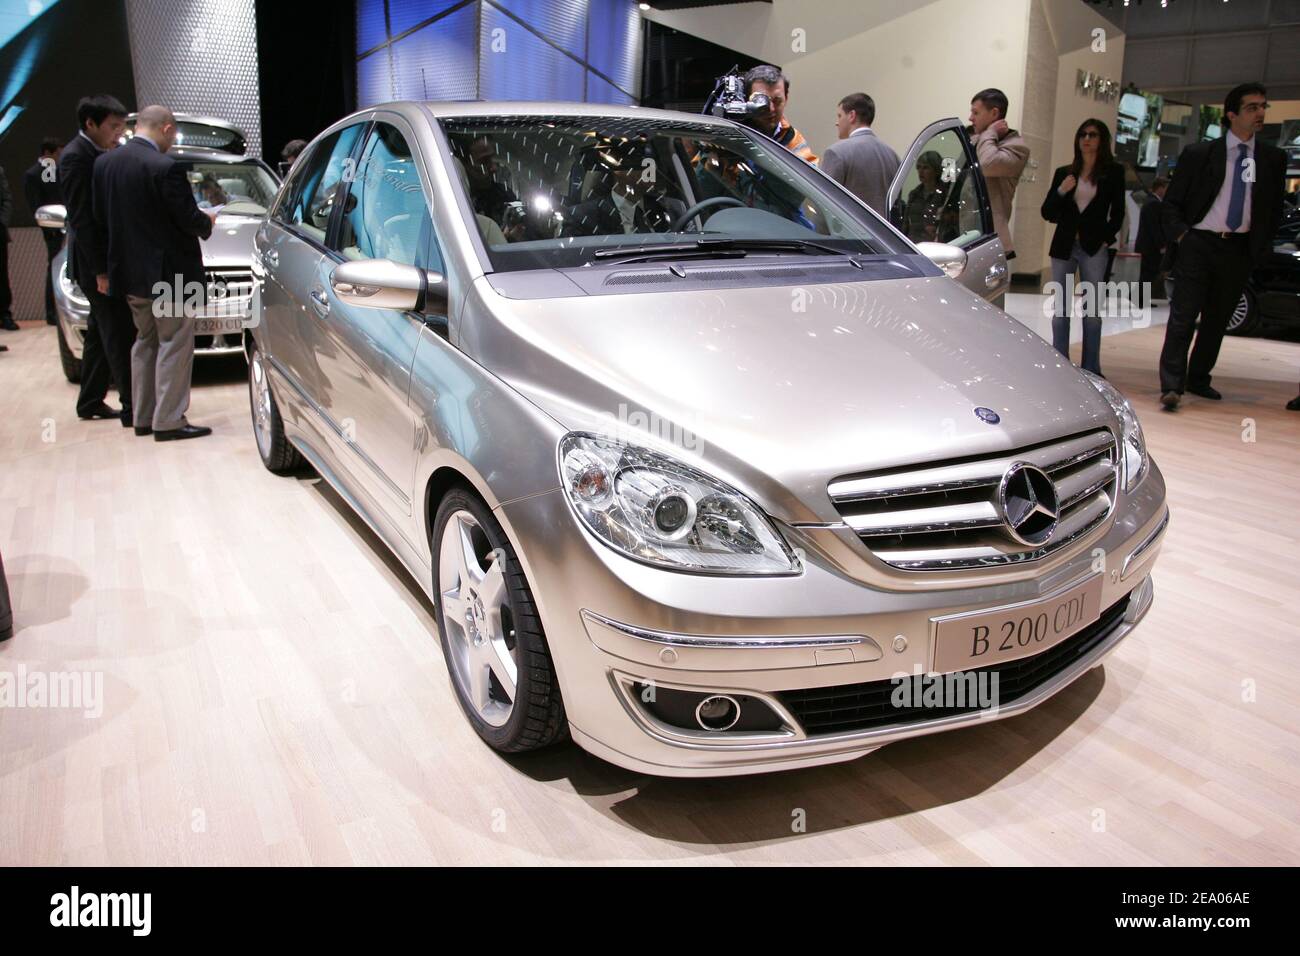 The Mercedes-Benz B 200 CDI is displayed at the 75th Geneva motor show in  Geneva, Switzerland, on March 2, 2005. Photo by Laurent Zabulon/ABACA Stock  Photo - Alamy